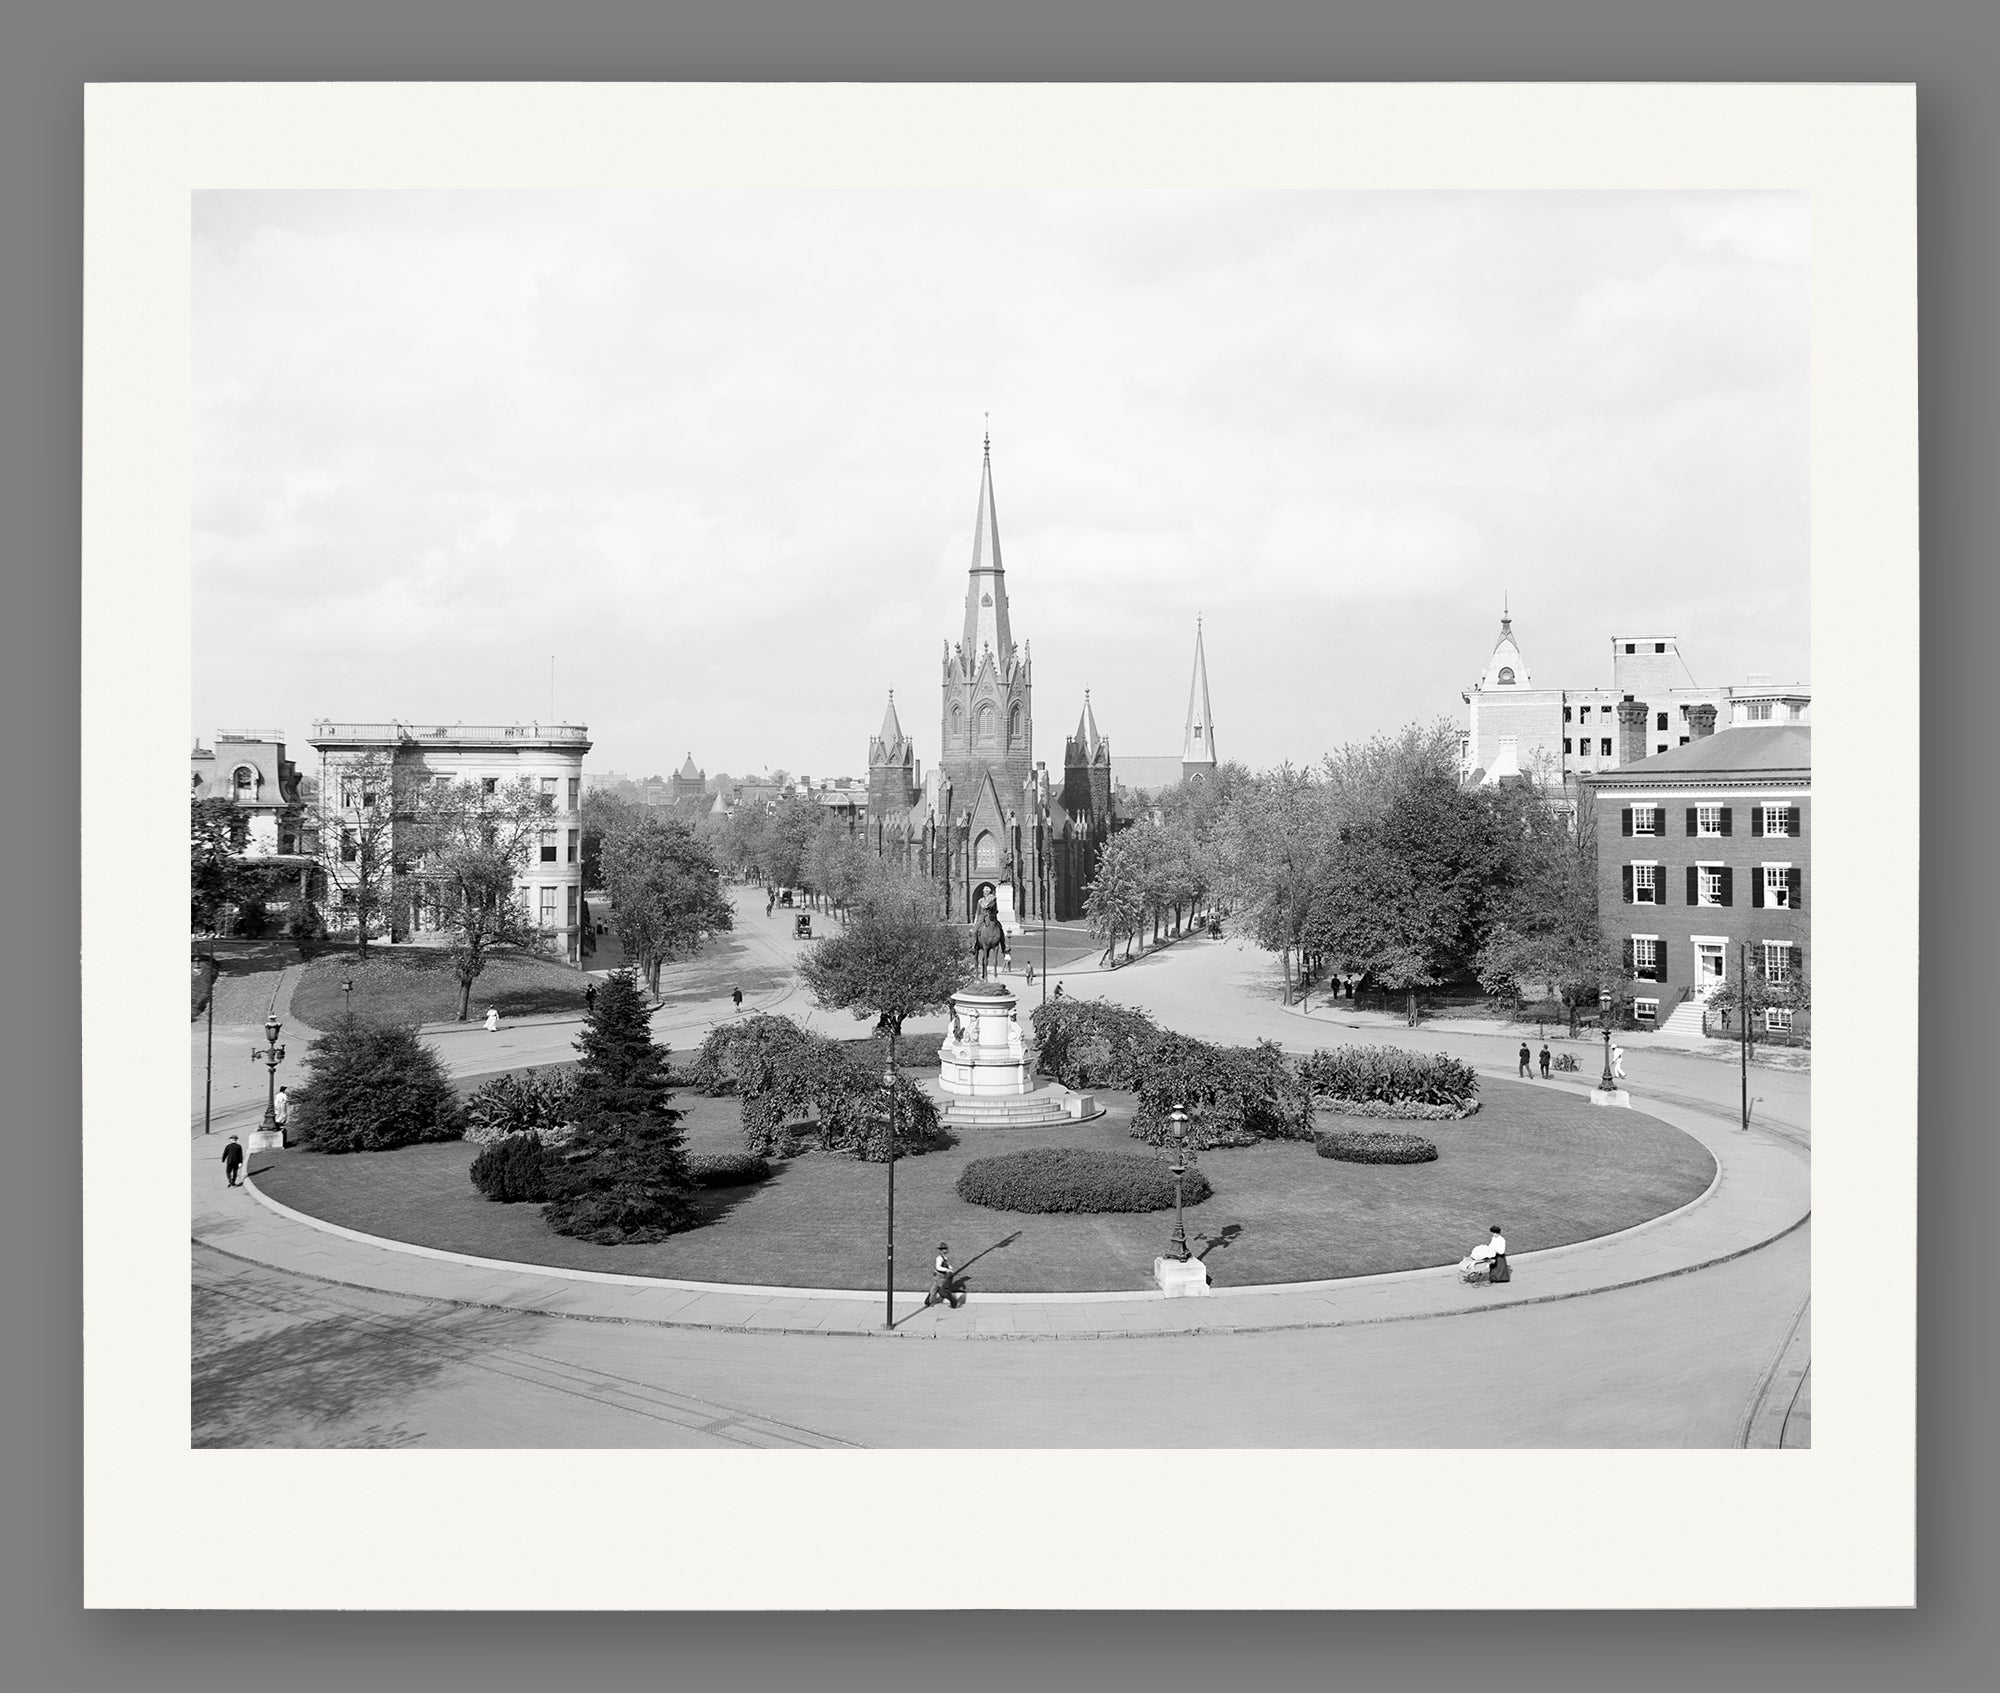 A paper print reproduction of a vintage photograph of Thomas Circle in DC